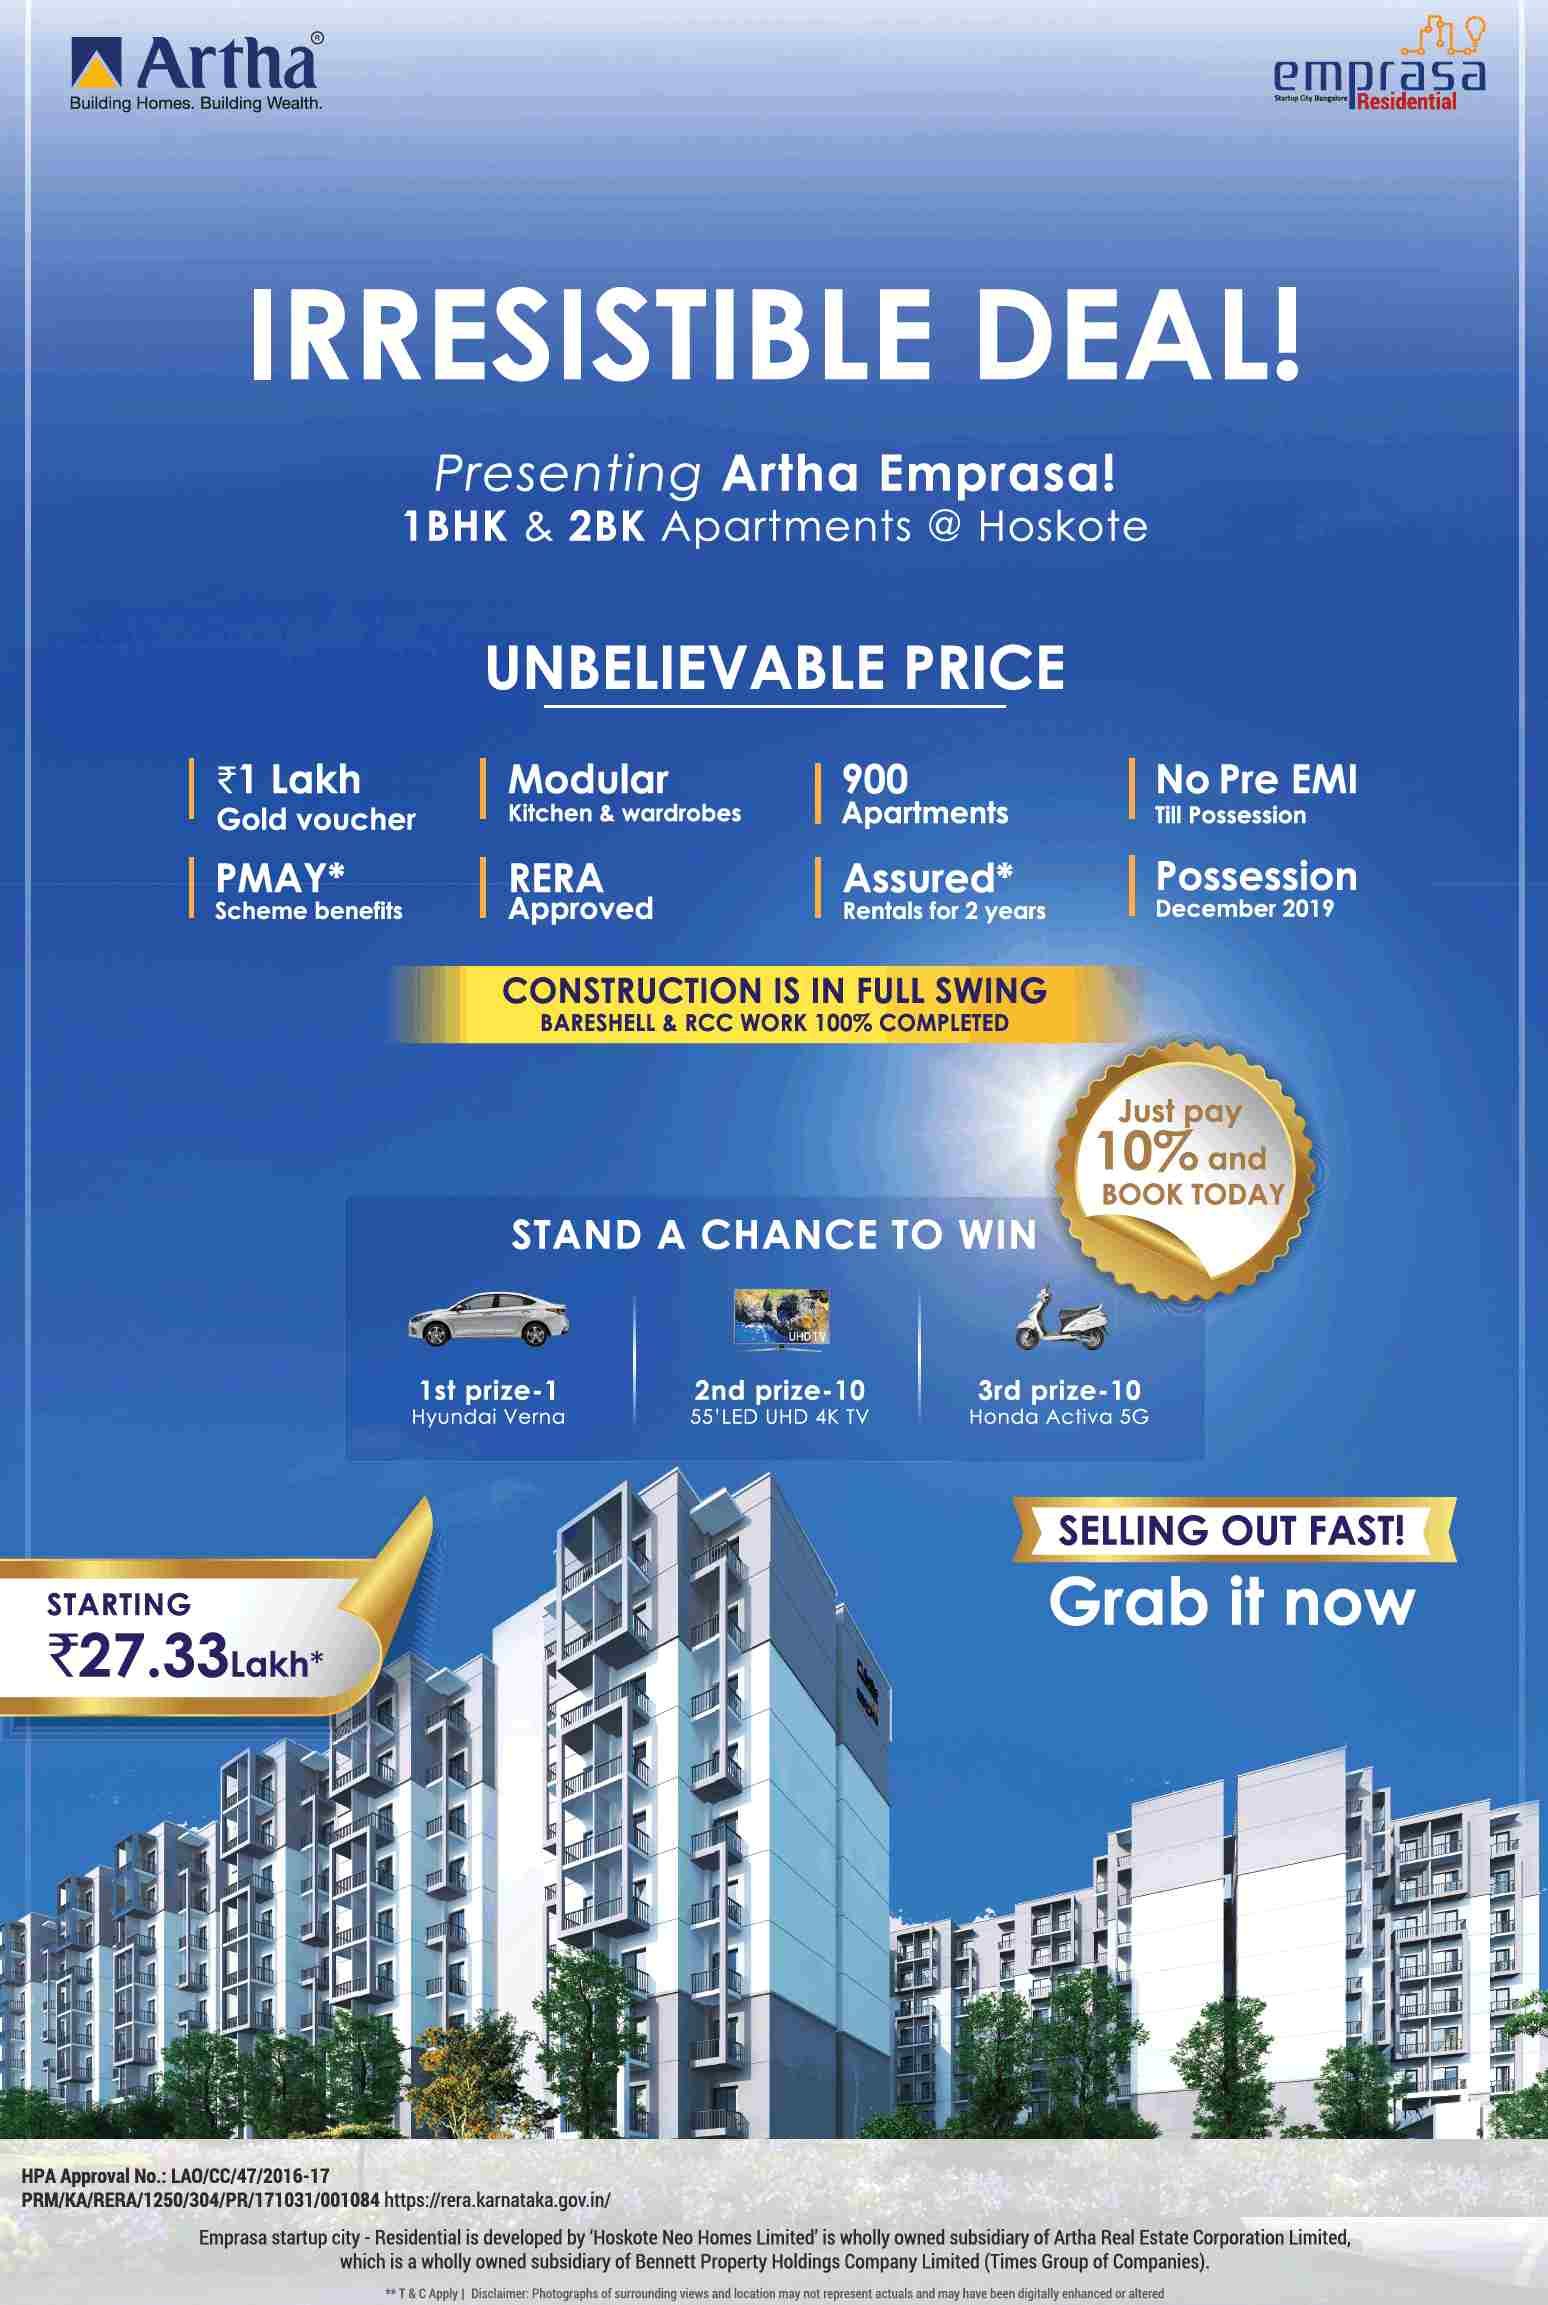 Just pay 10% and book today at Artha Emprasa in Hoskote, Bangalore